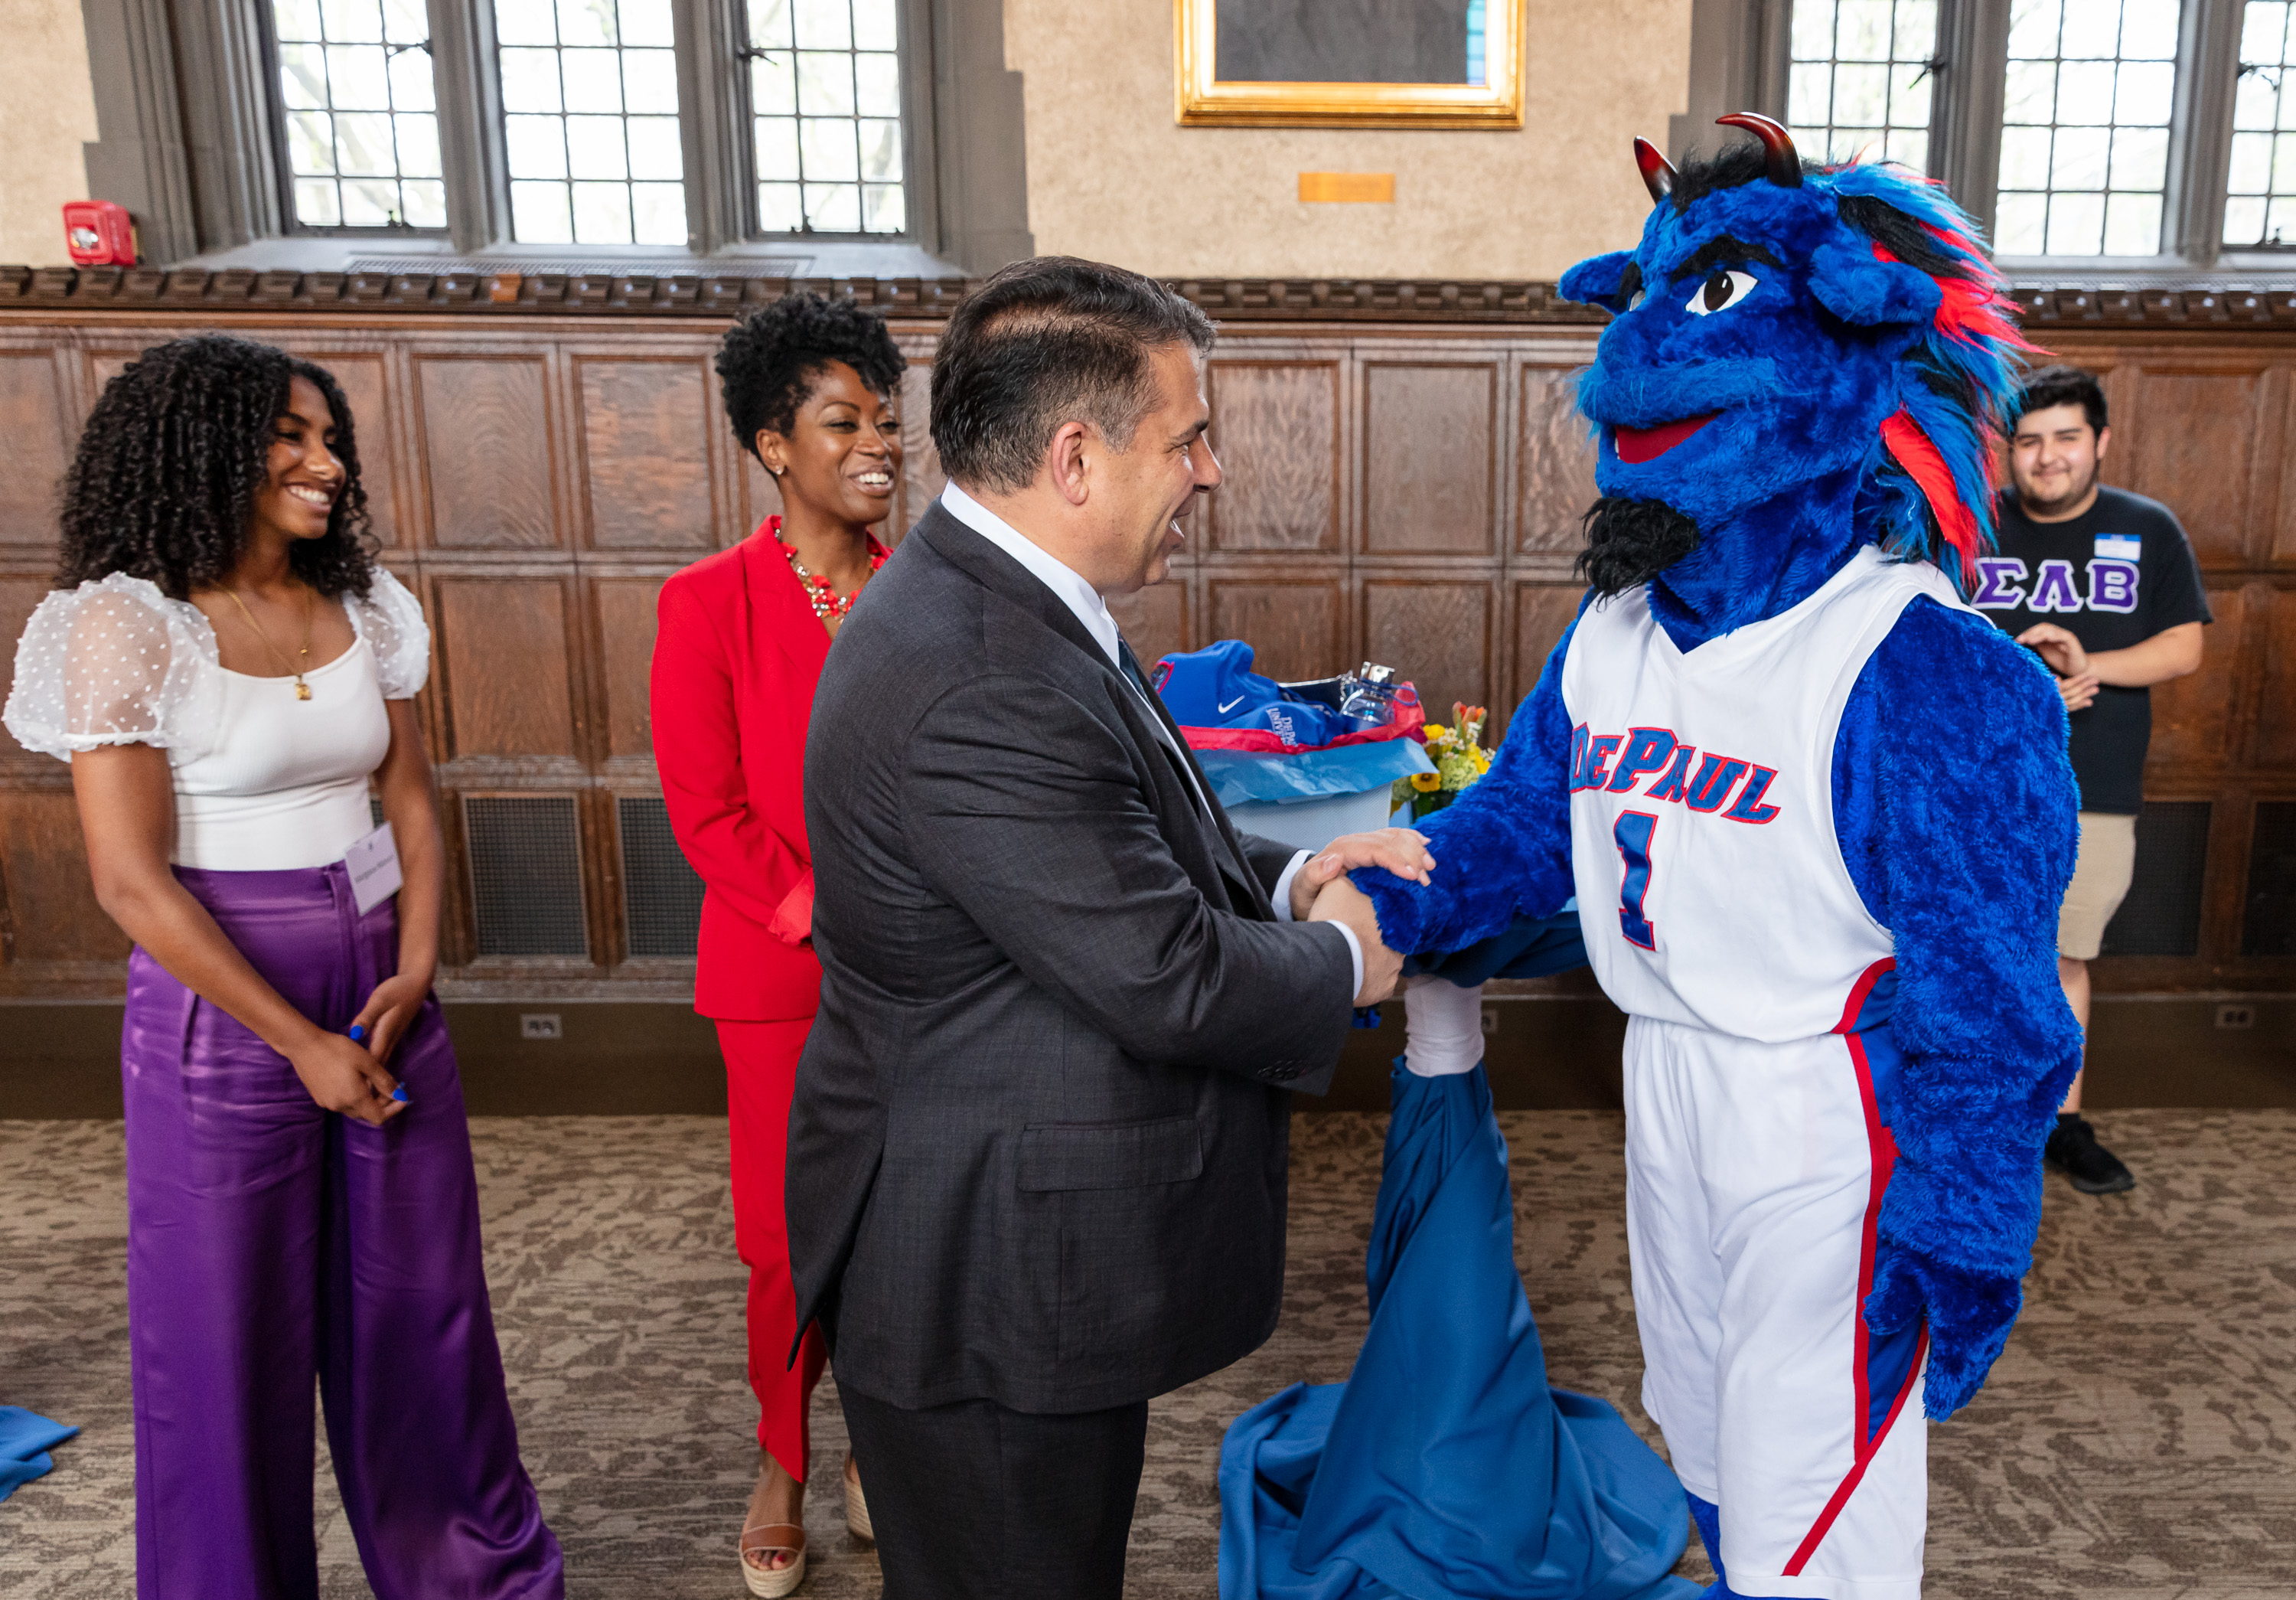 During an afternoon reception, DIBS presented the newest Blue Demons with small gifts, inducting them into the DePaul family. (DePaul University/Randall Spriggs)